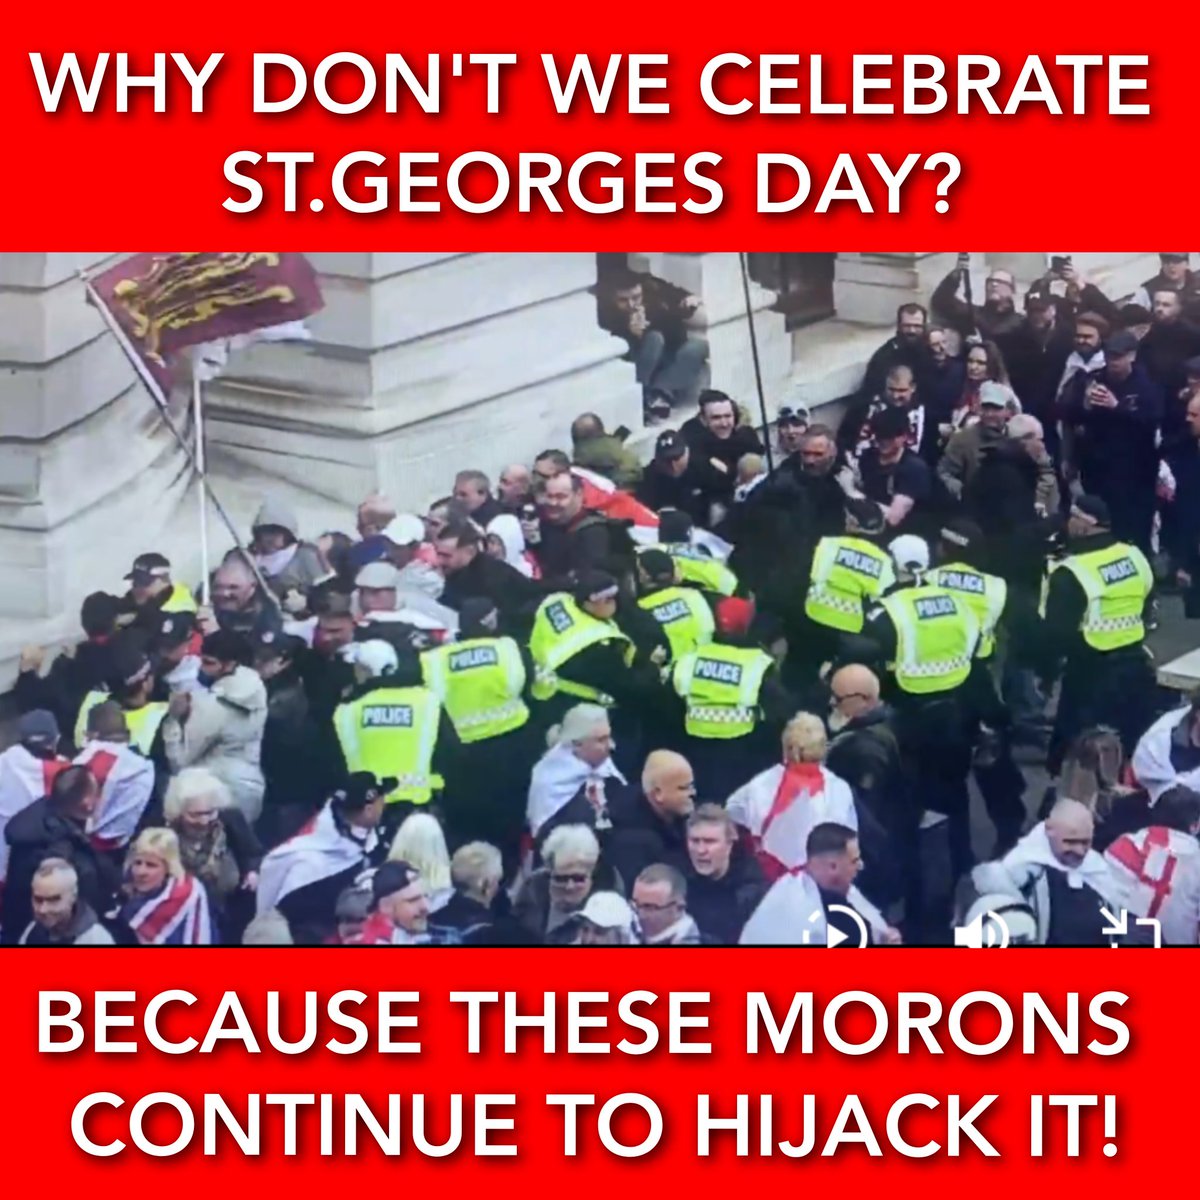 🚨 Will @SuellaBraverman have the brass neck to come out and condemn THIS hate march in #London today? 💁🏻‍♂️

She's all over them usually! 

#NeverTrustATory #ToryCriminals 
#ToryFascistDictatorship 
#ToriesUnfitToGovern #ToriesAreEvil #StGeorgesDay #GeneralElectionNow